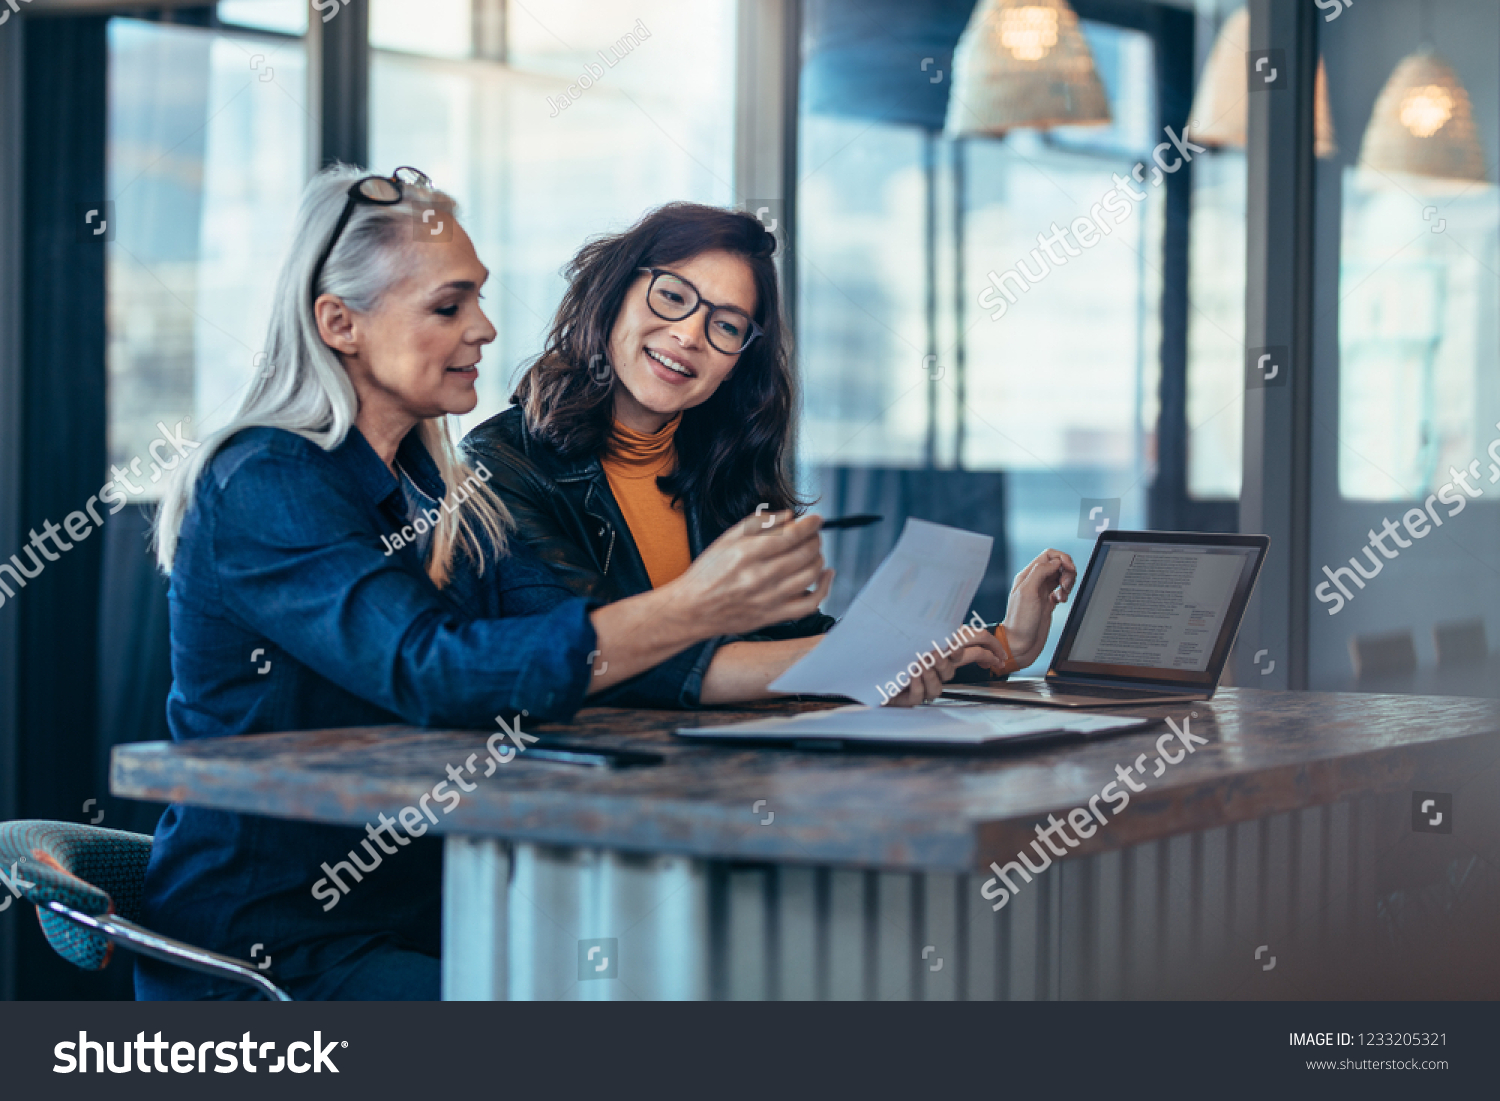 Two women analyzing documents while sitting on a table in office. Woman executives at work in office discussing some paperwork. #1233205321